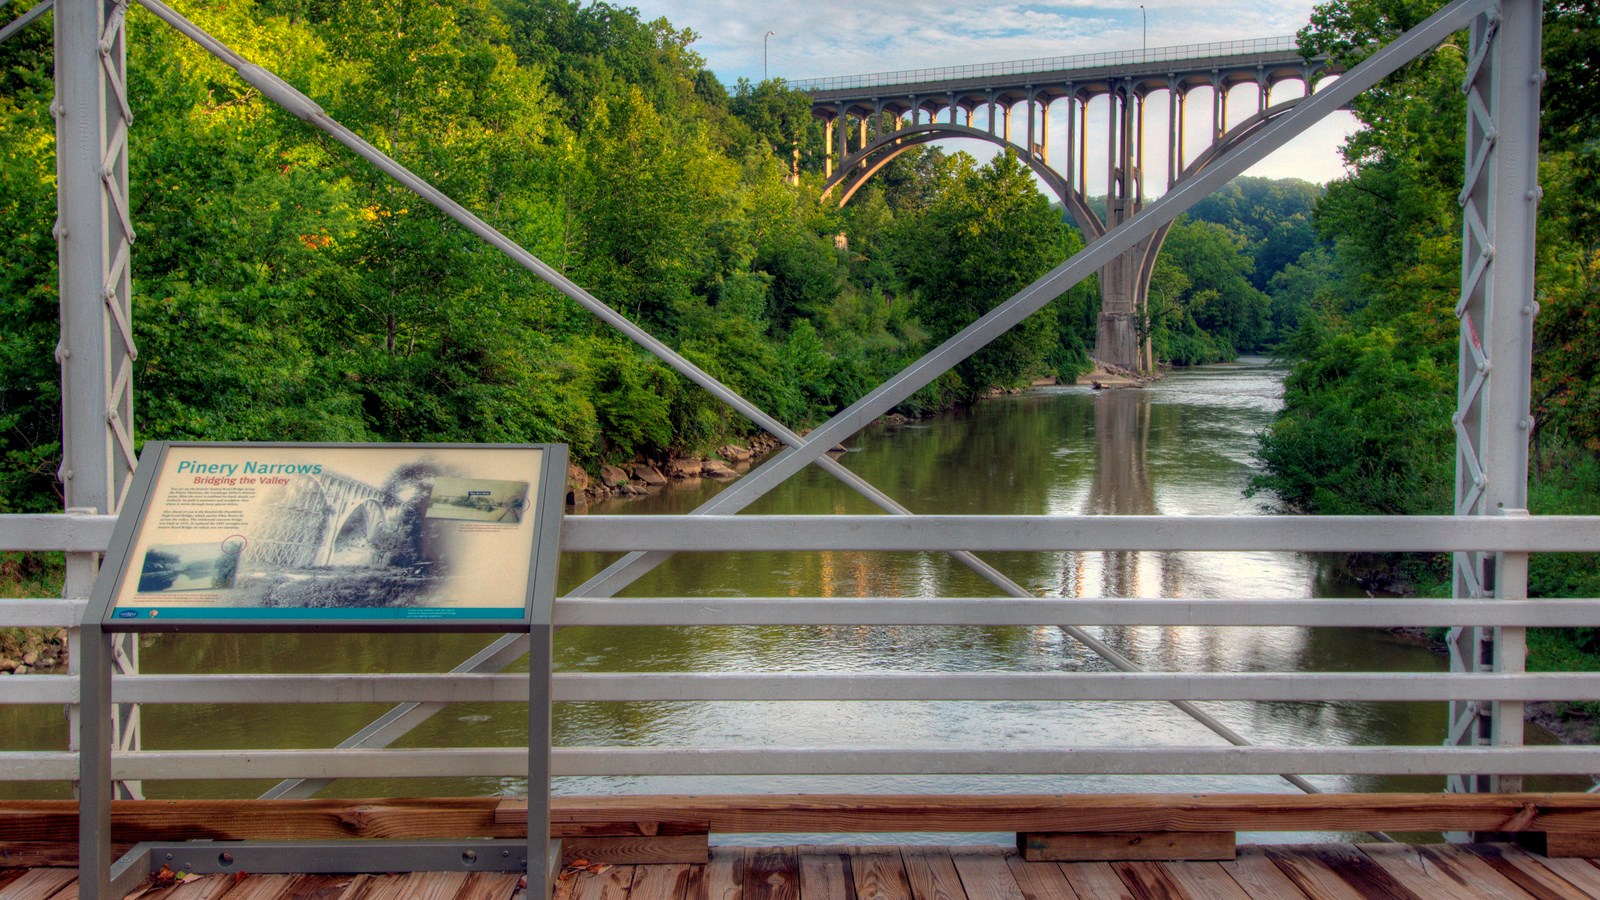 An iron bridge over a river with Pinery Narrows panel showing a distant concrete bridge bring built.